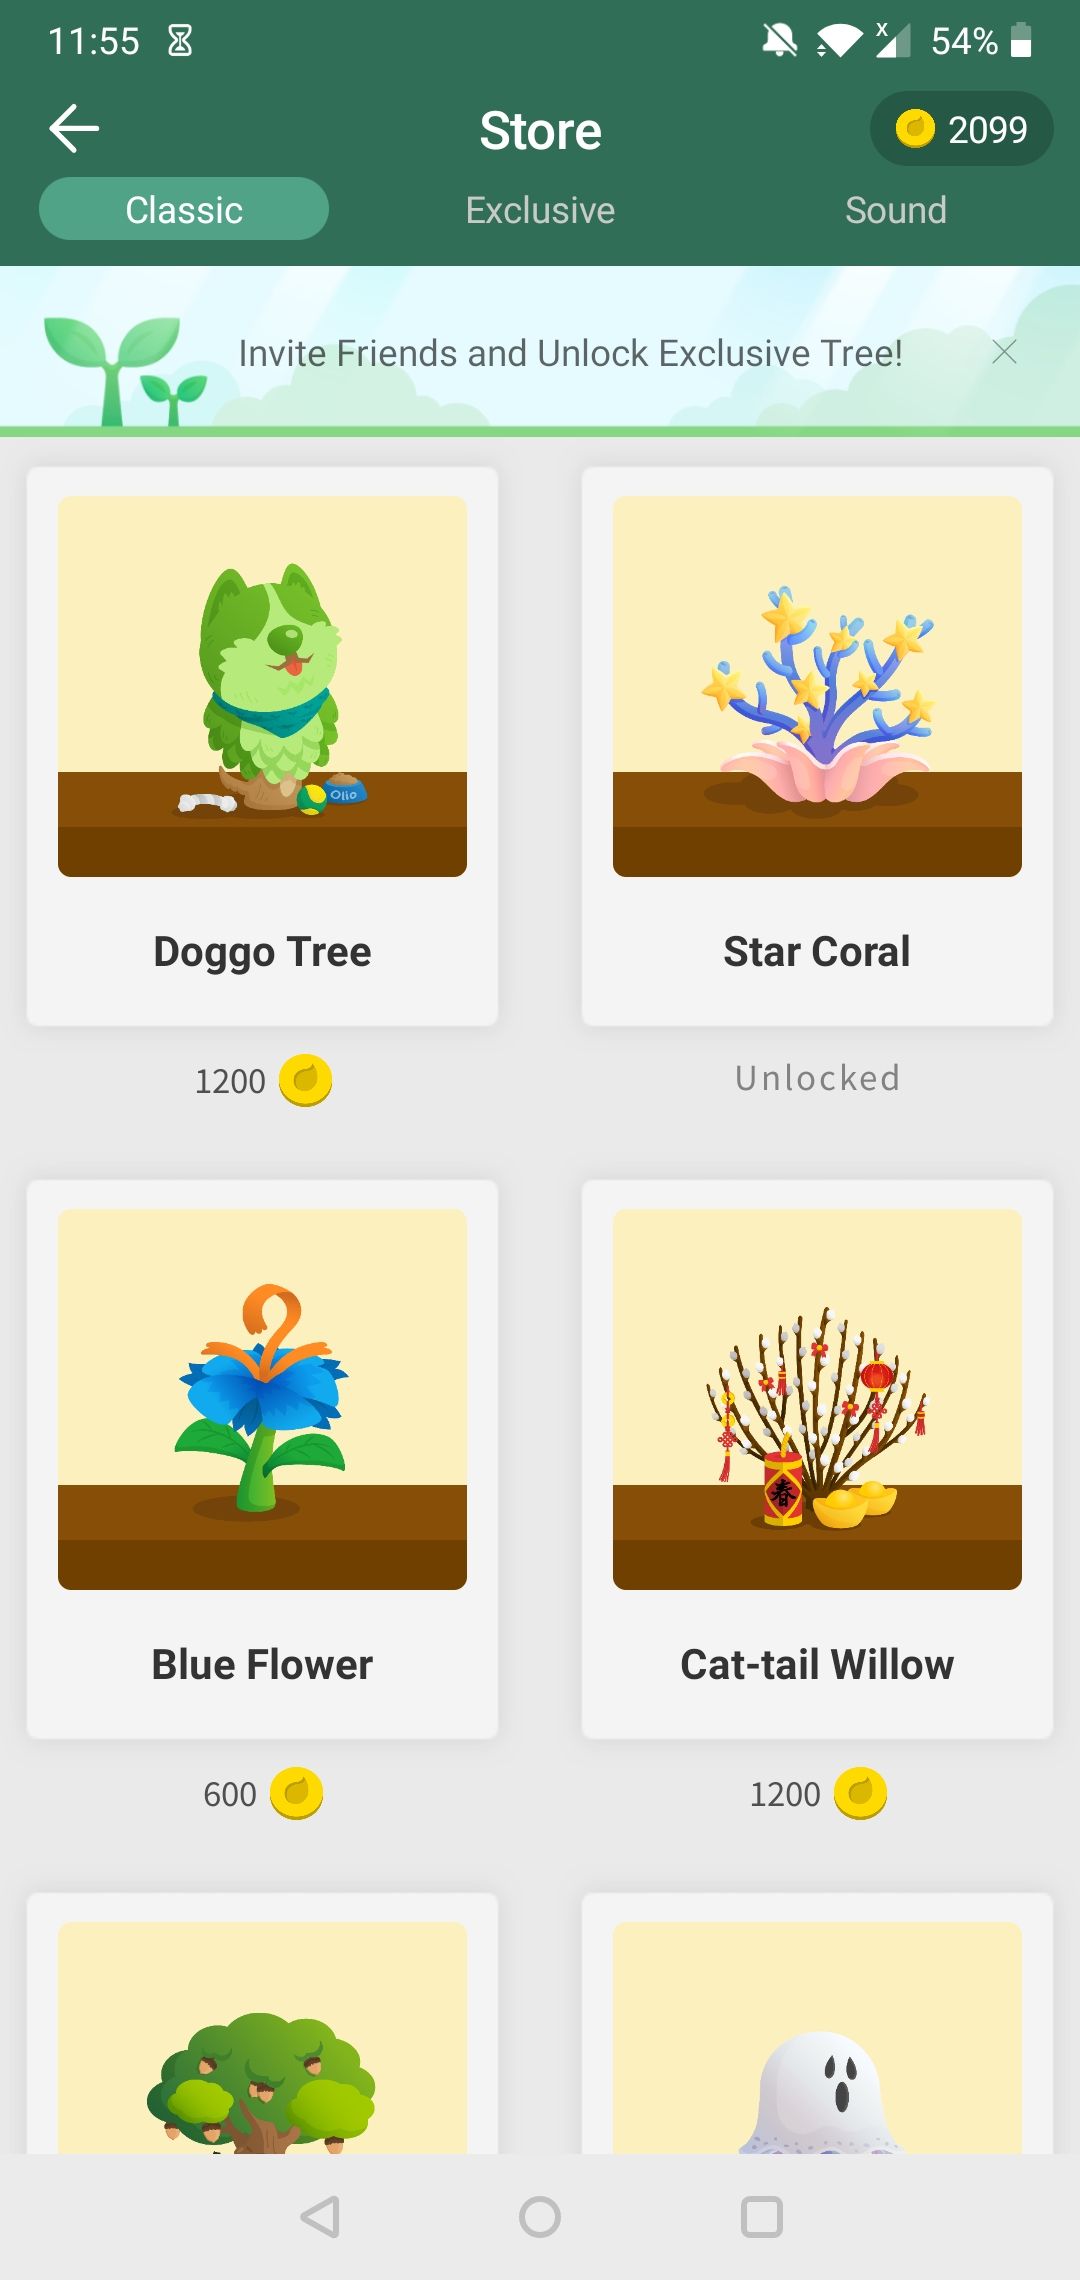 The store on the Forest Android app, on the "Classic" section.